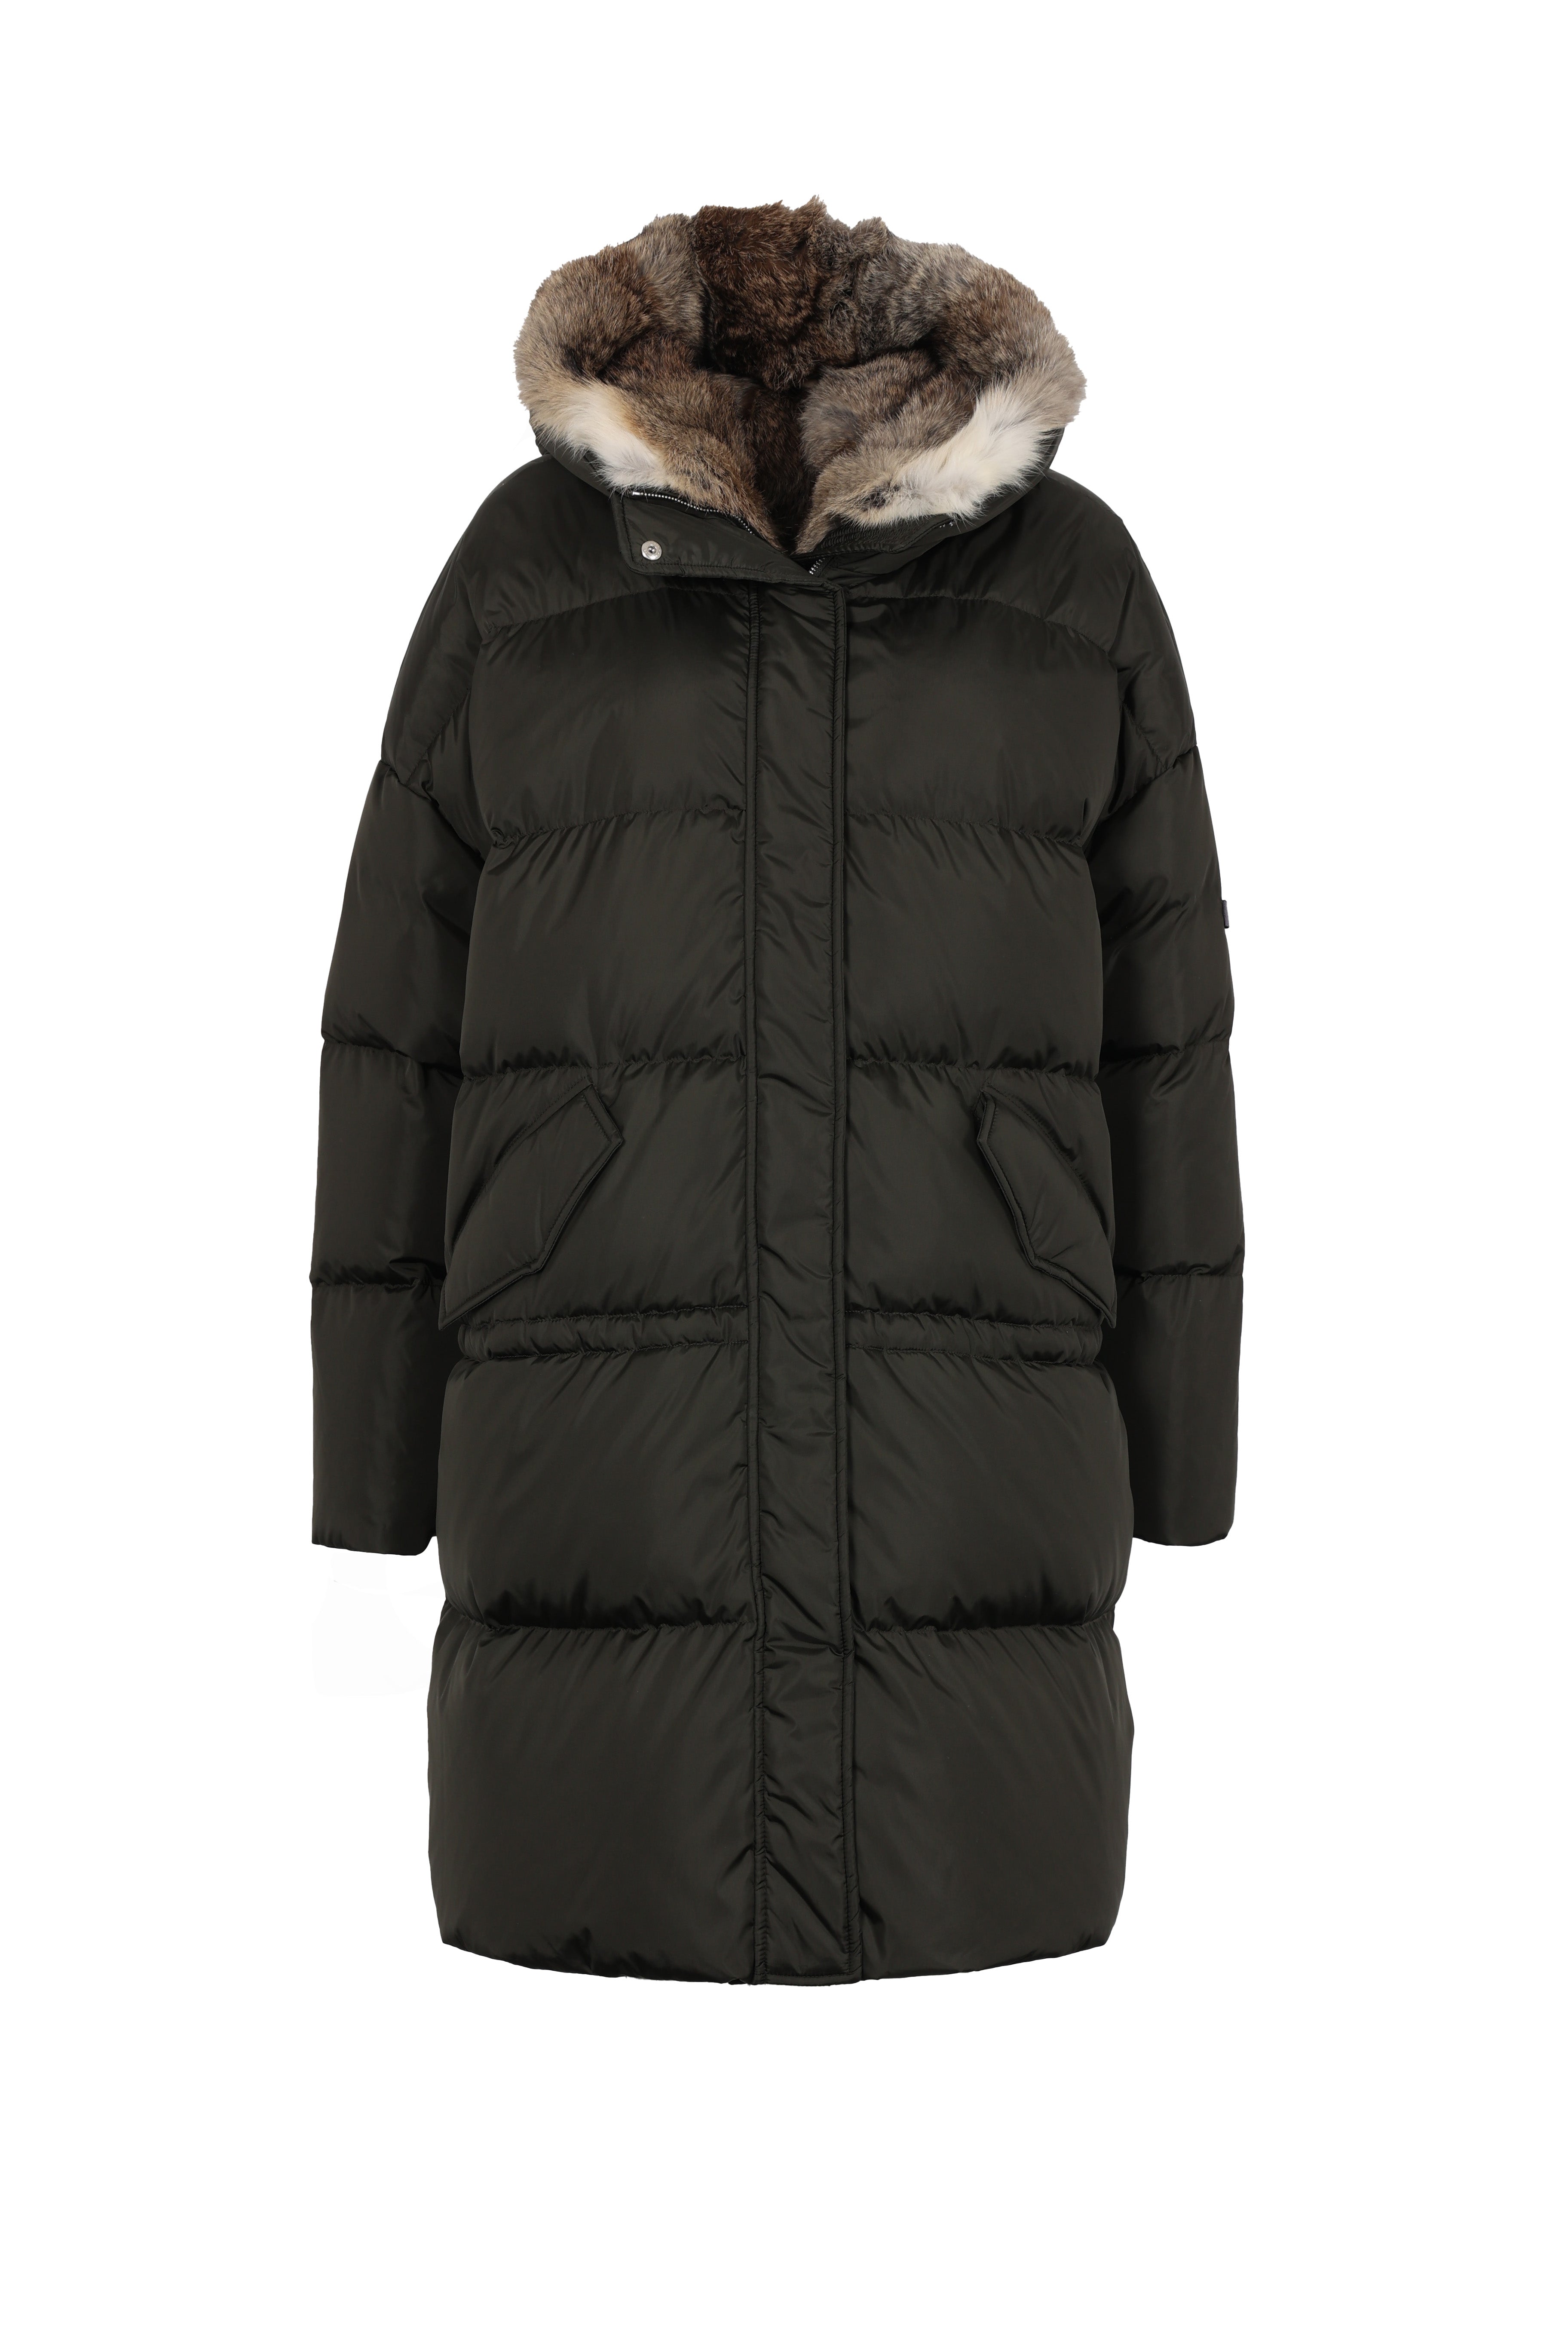 oversized Lempelius down parka in the color dark green